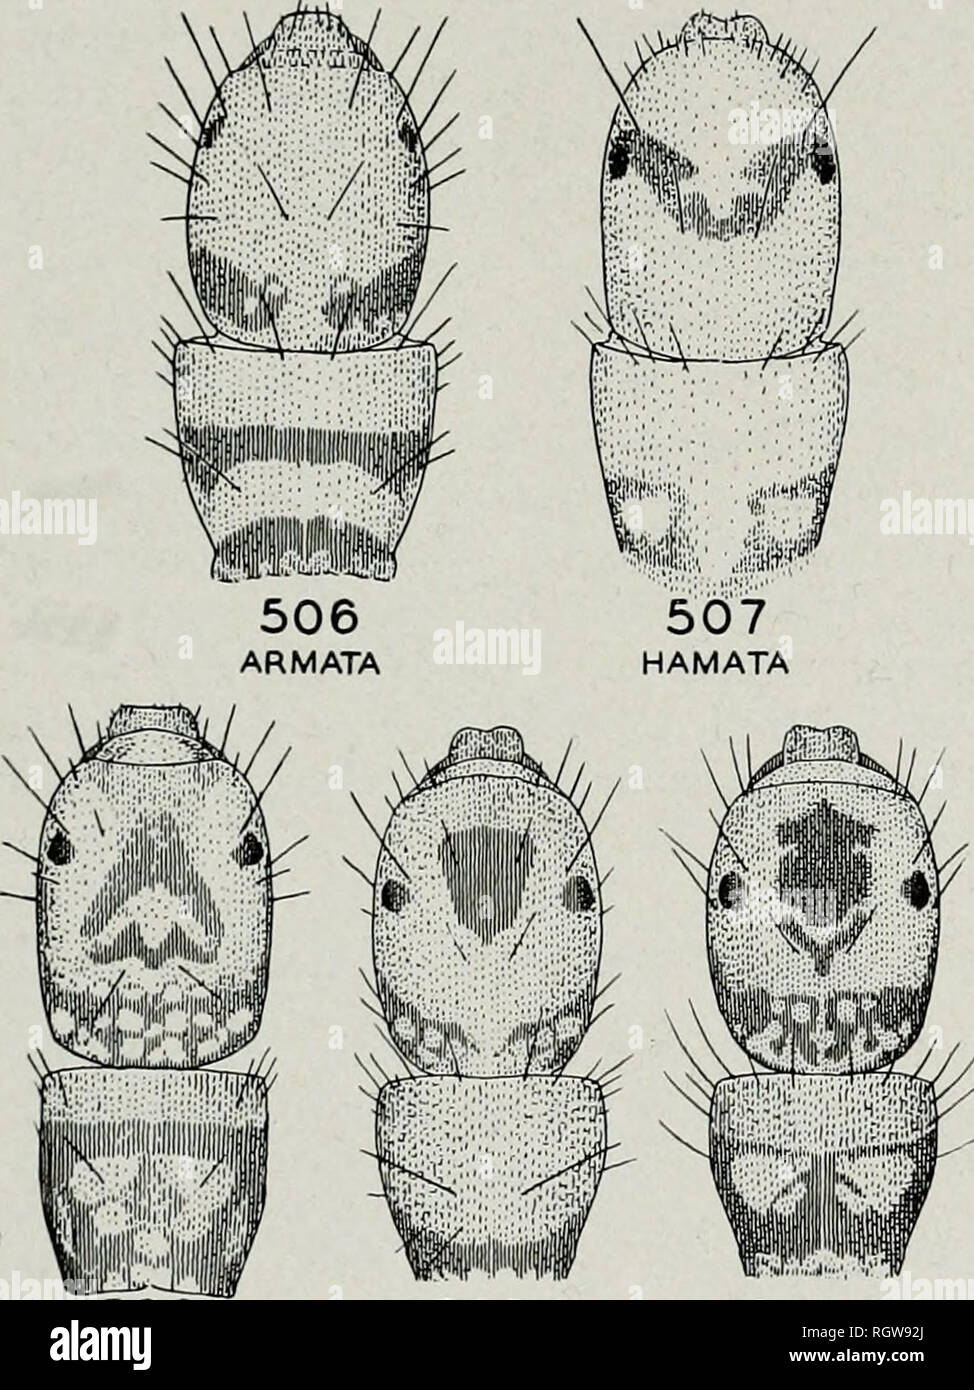 . Bulletin. Natural history; Natural history. SIlUii .503 CONSIMILIS 504 SPATULATA 505 ALBICORNIS. 508 GRANDIOSA 509 A WAUBESIANA 509 B Figs. 503-509.—Hydroptila larvae. 7. Head varying from yellow with dark marks arranged as in fig. SQ9A to much darker with Hght areas as in fig. 5095; each notum varies as shown: waubesiana. 8. Head and pronotum almost entirely black, head with at most an indistinct light area between posterior and anterior dark dorsal areas: probably dark specimens of ha- mata. KEY TO SPECIES Adults 1. Apex of abdomen with complicated set of appendages, figs. 510-526 (males)  Stock Photo